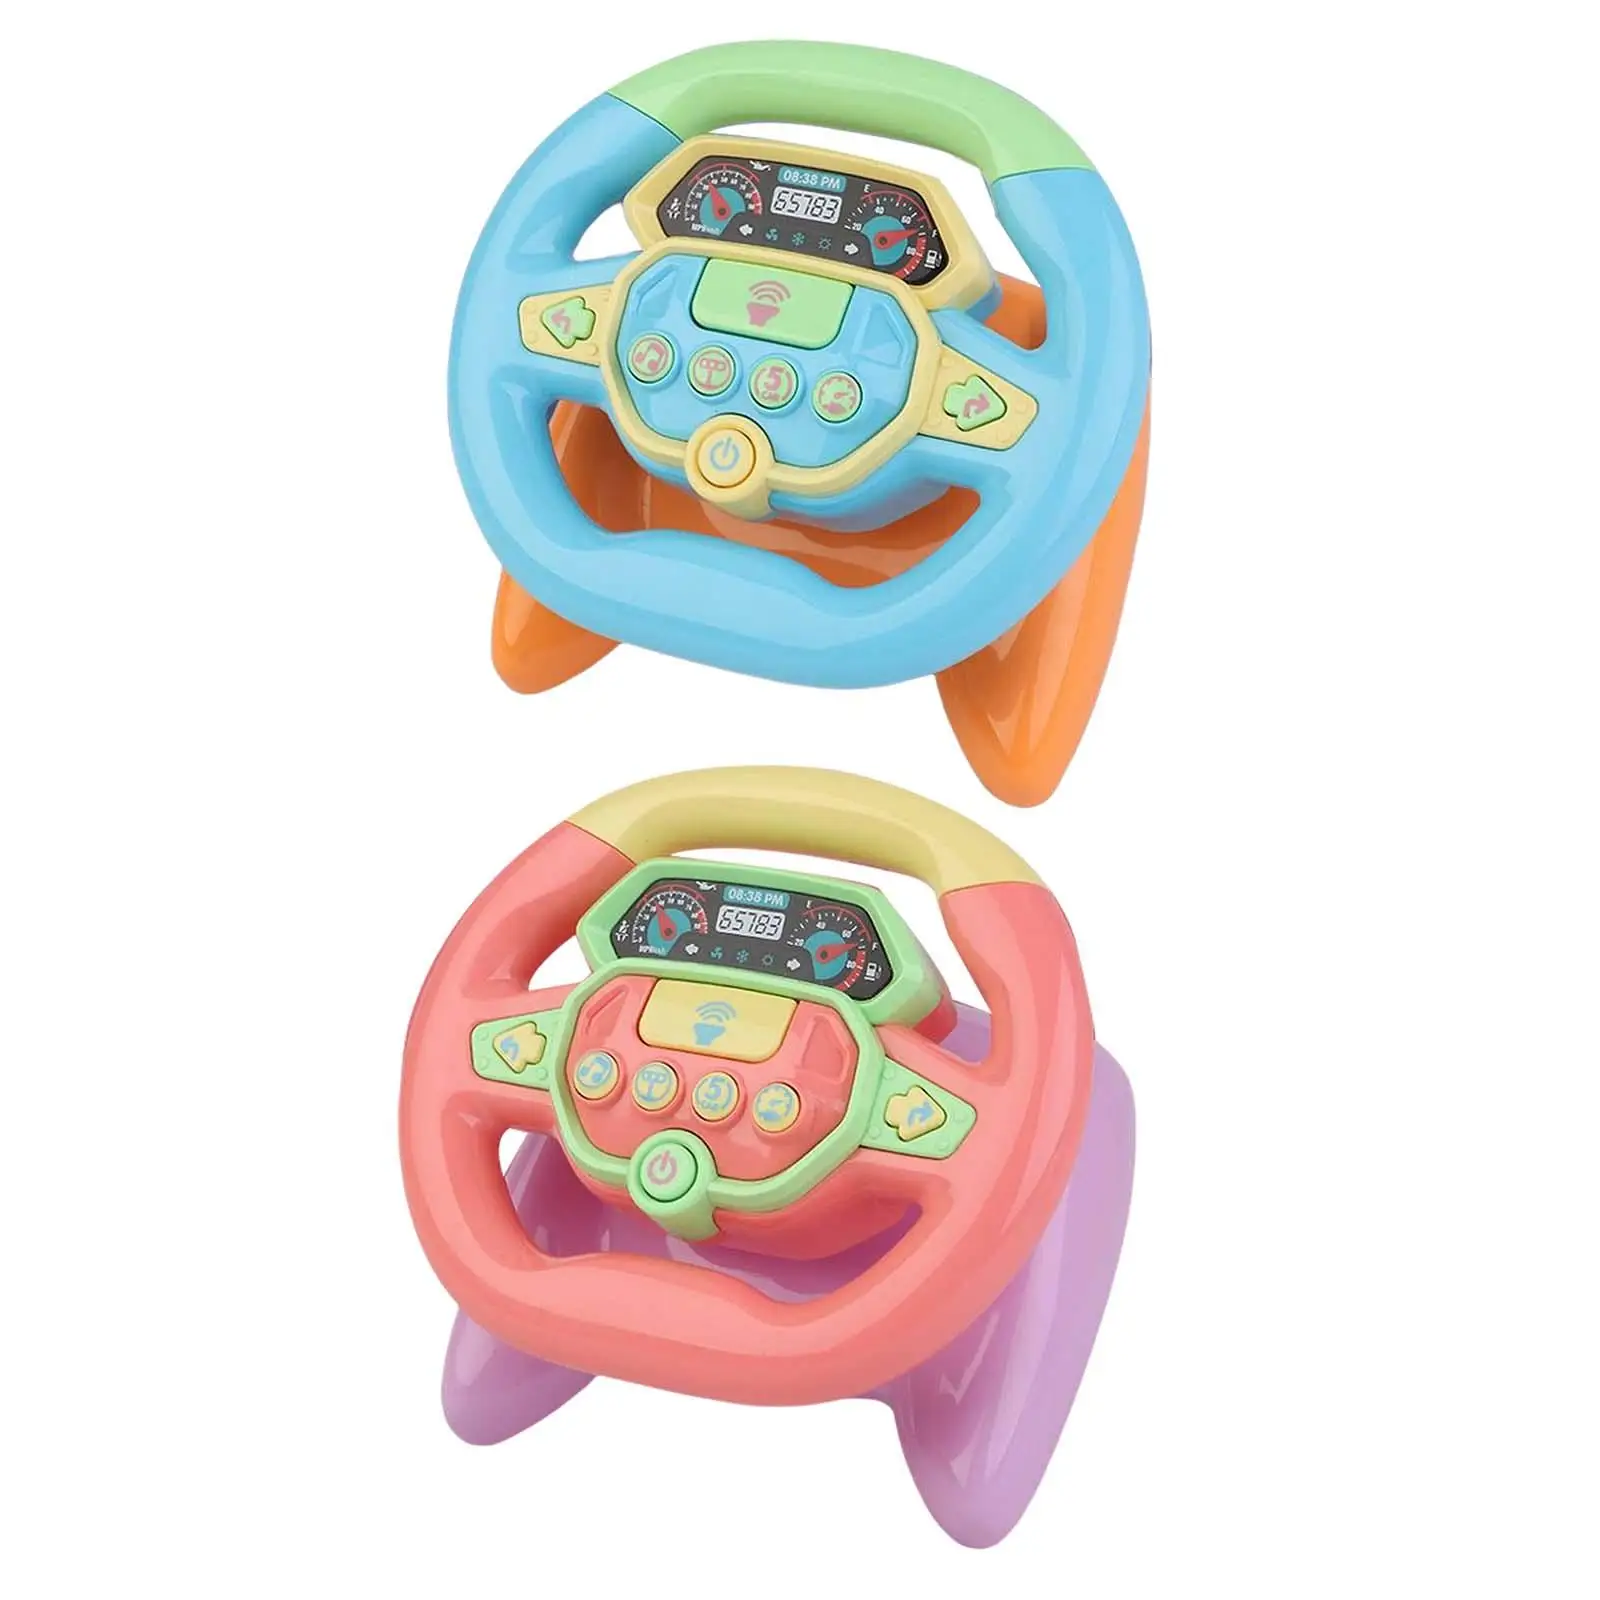 Rotating Simulated Driving Steering Wheel Toy Educational Learning Toy Pretend Play Entertainment Interactive Birthday Gifts